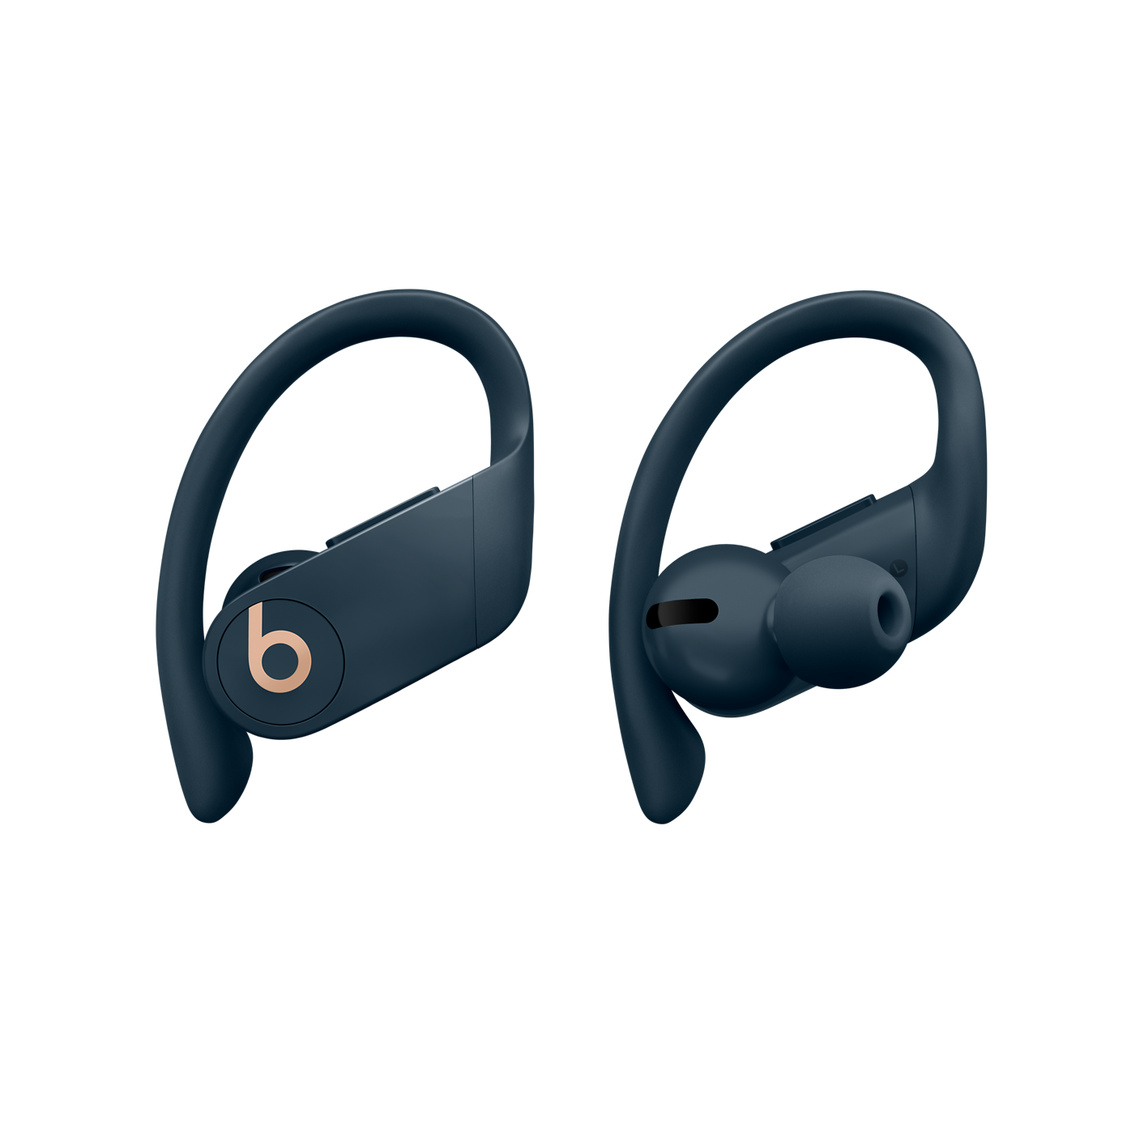 Powerbeats Pro True Wireless Earbuds, in Navy, with adjustable, secure-fit earhooks, are customisable with multiple ear tip options for extended comfort.